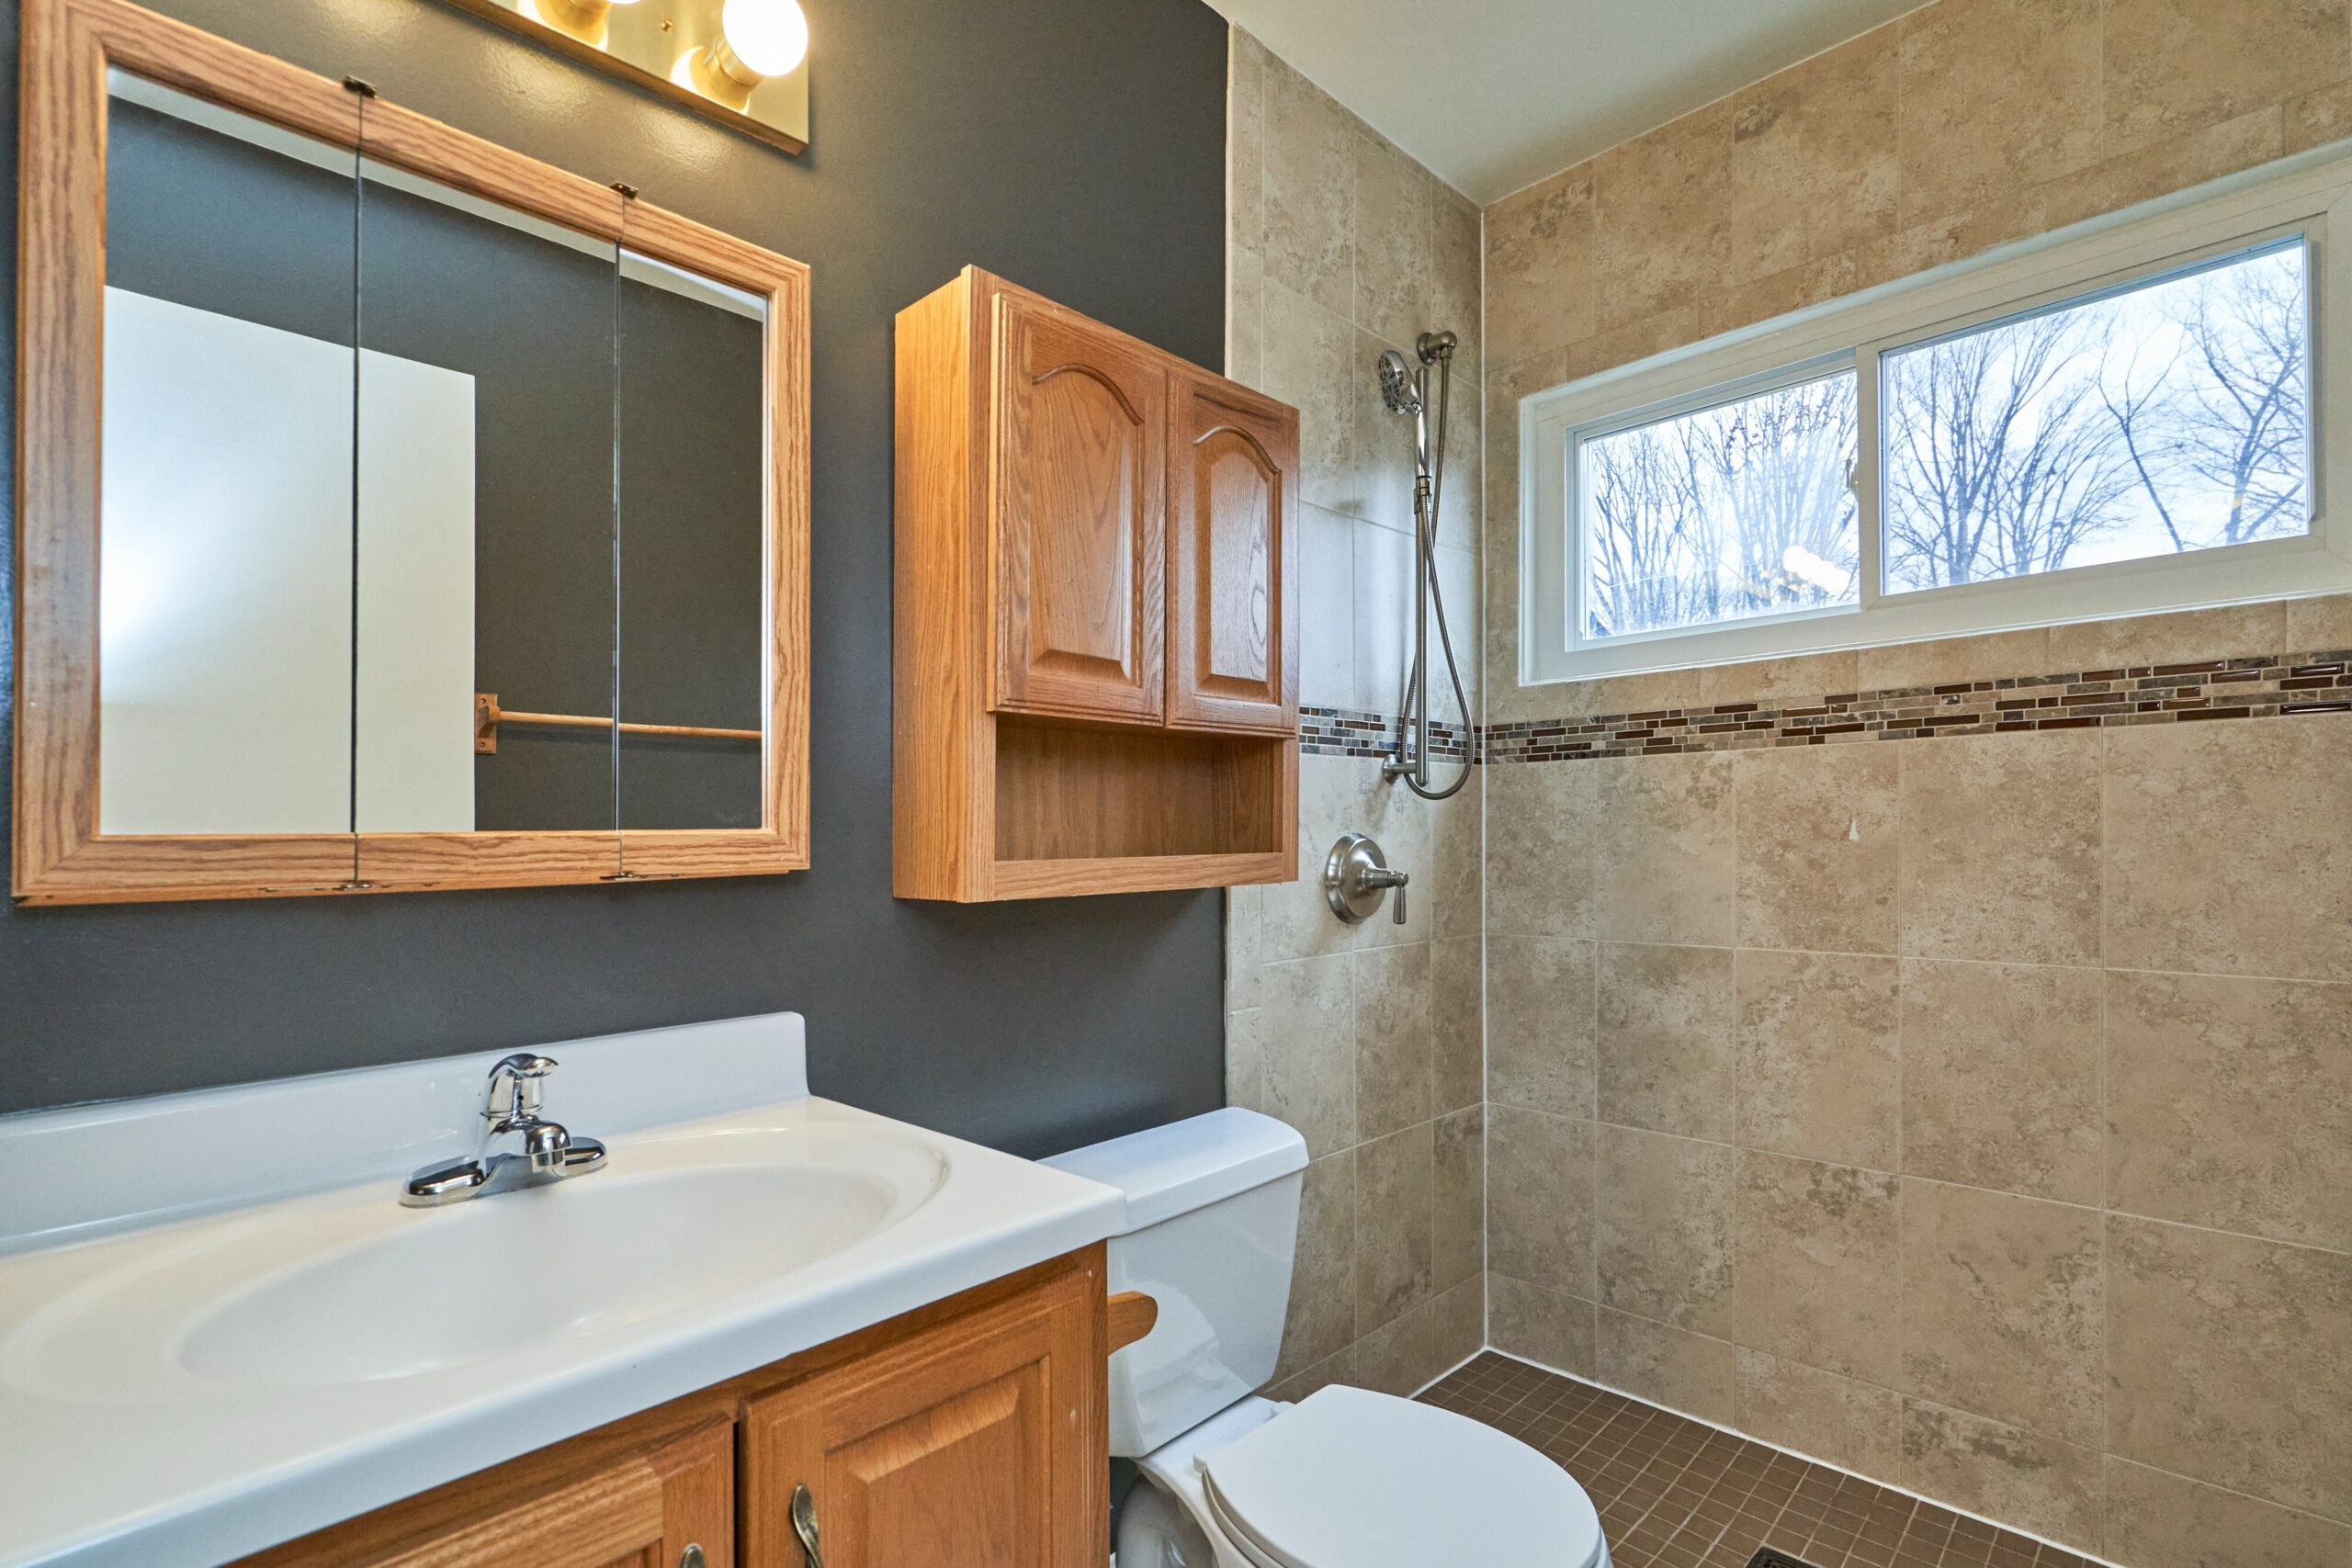 Professional interior photo of 3482 Mildred Drive in Falls Church virginia, showing one of the full bathrooms with large zero entry tile shower